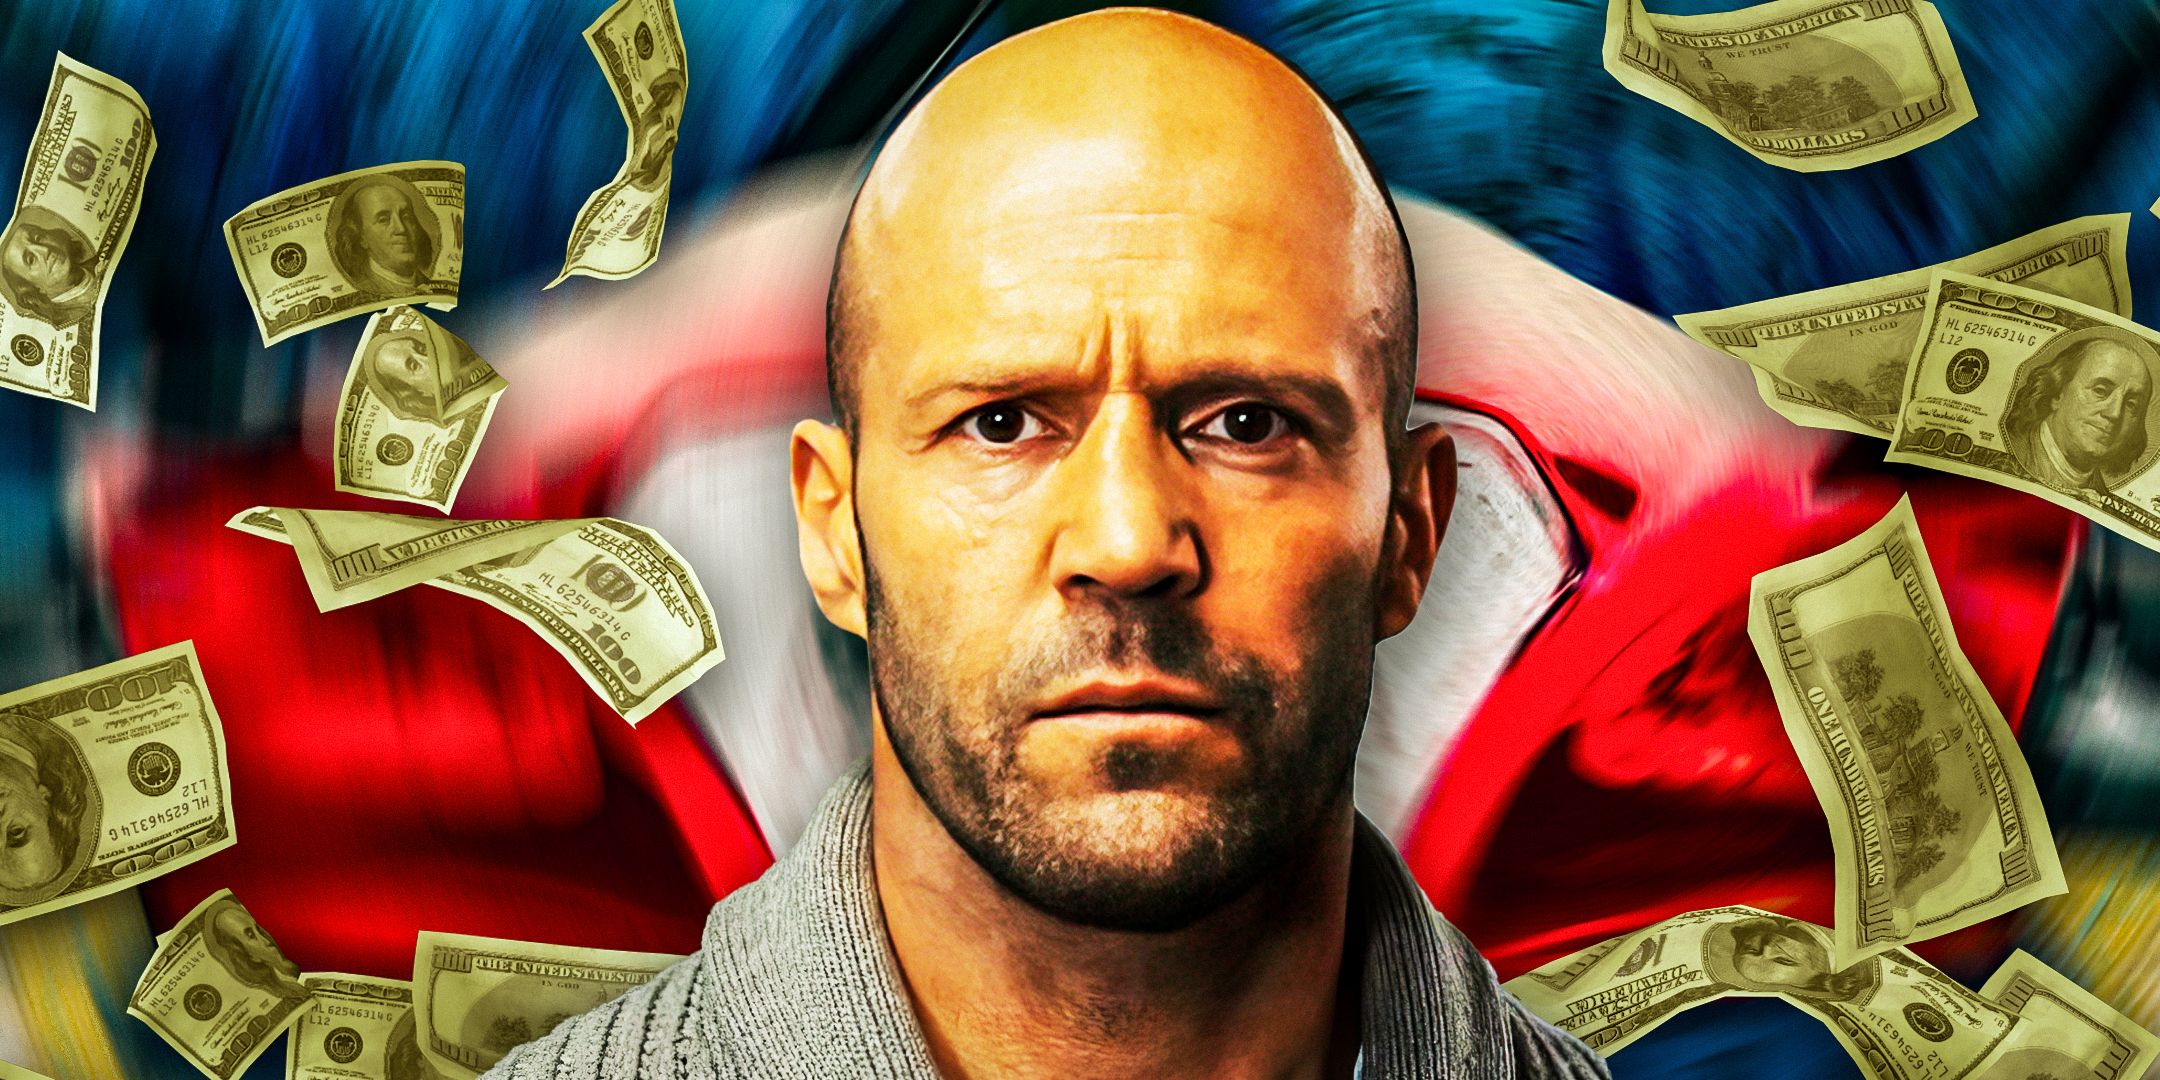 Jason-Statham-as-H-from-Wrath-of-Man-1